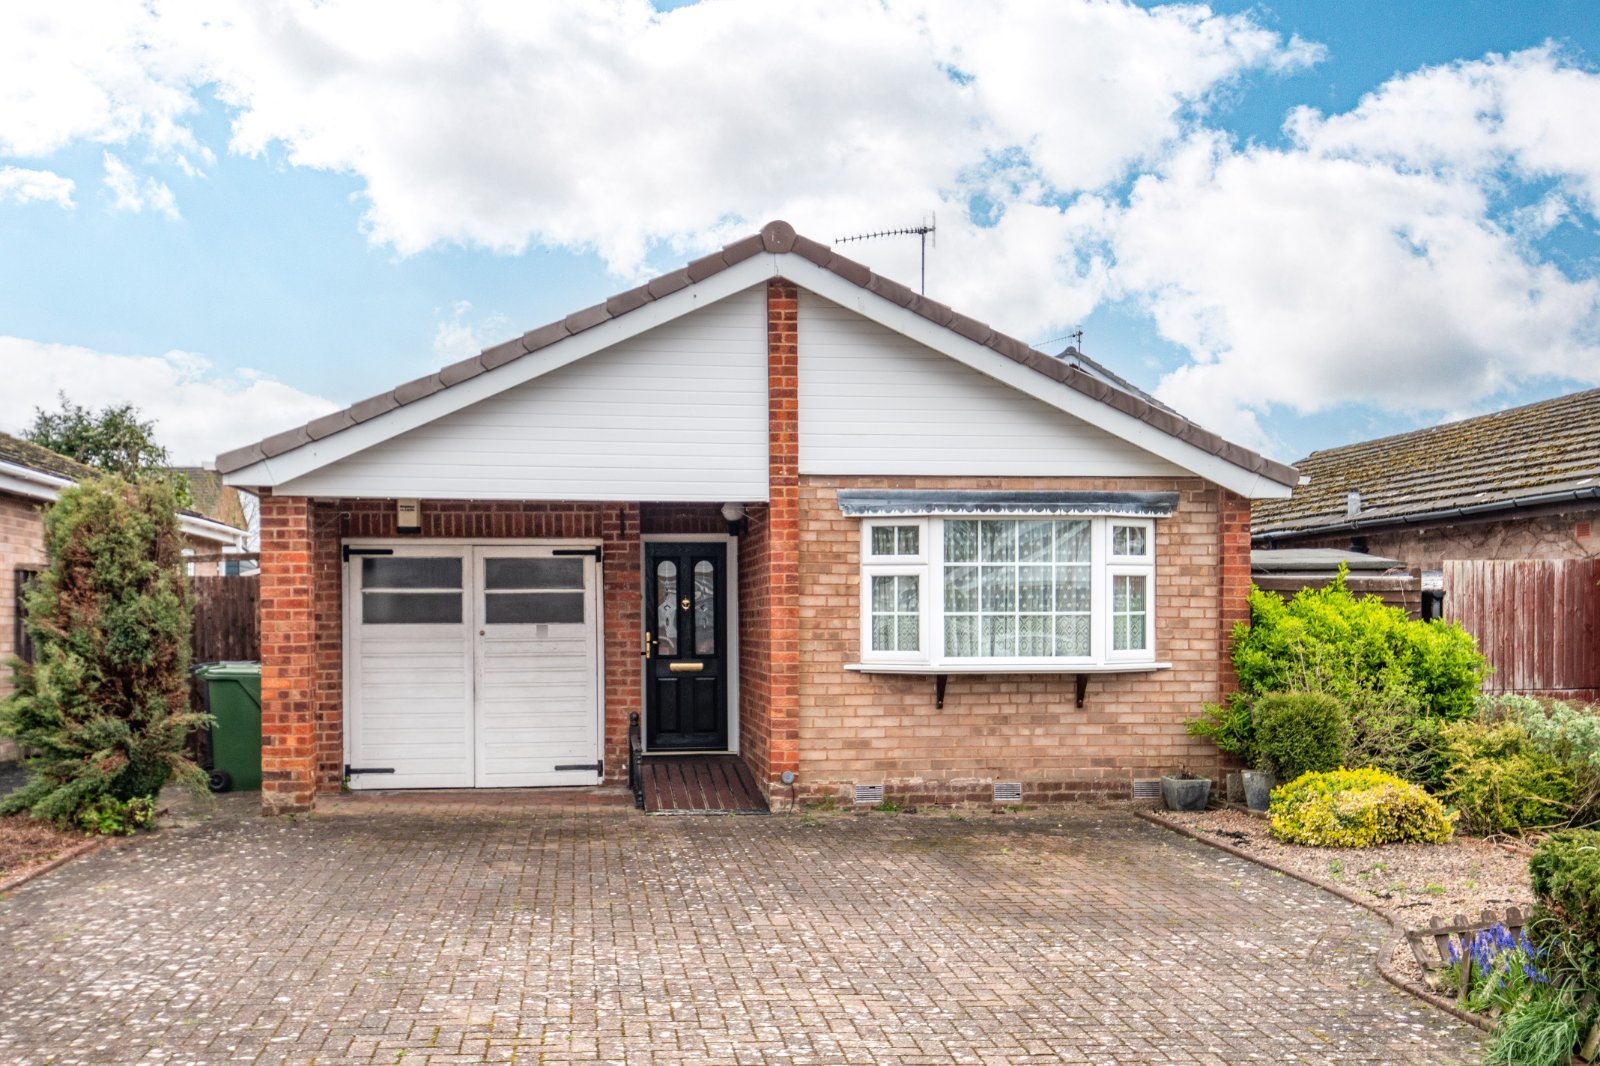 3 bed bungalow for sale in Cloverdale, Stoke Prior  - Property Image 1